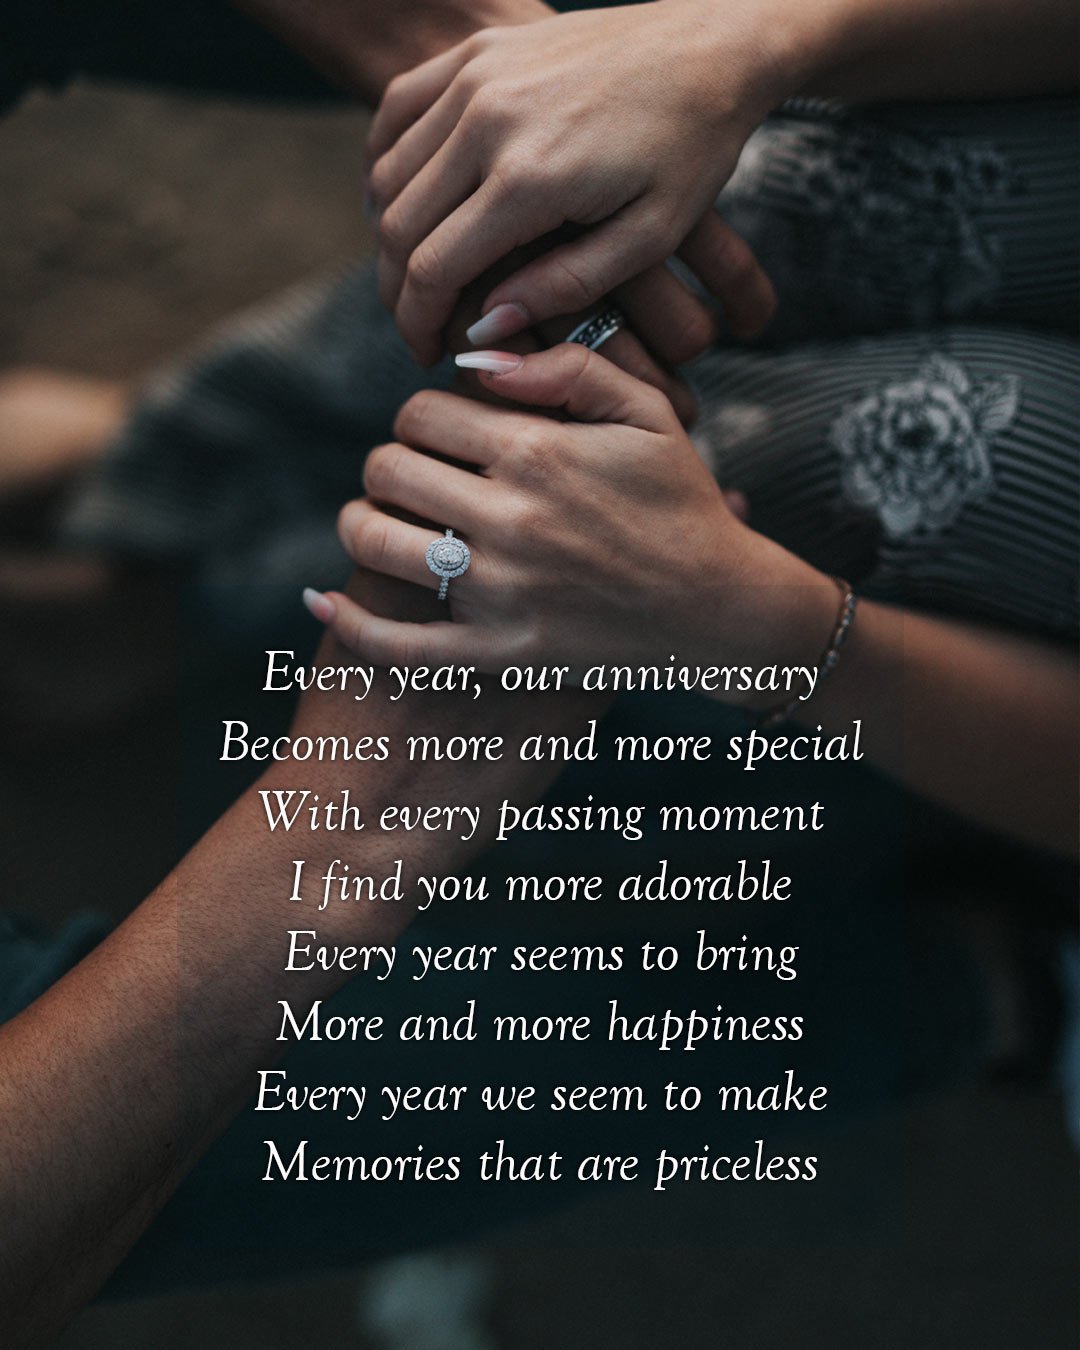 Marriage anniversary poems for wife